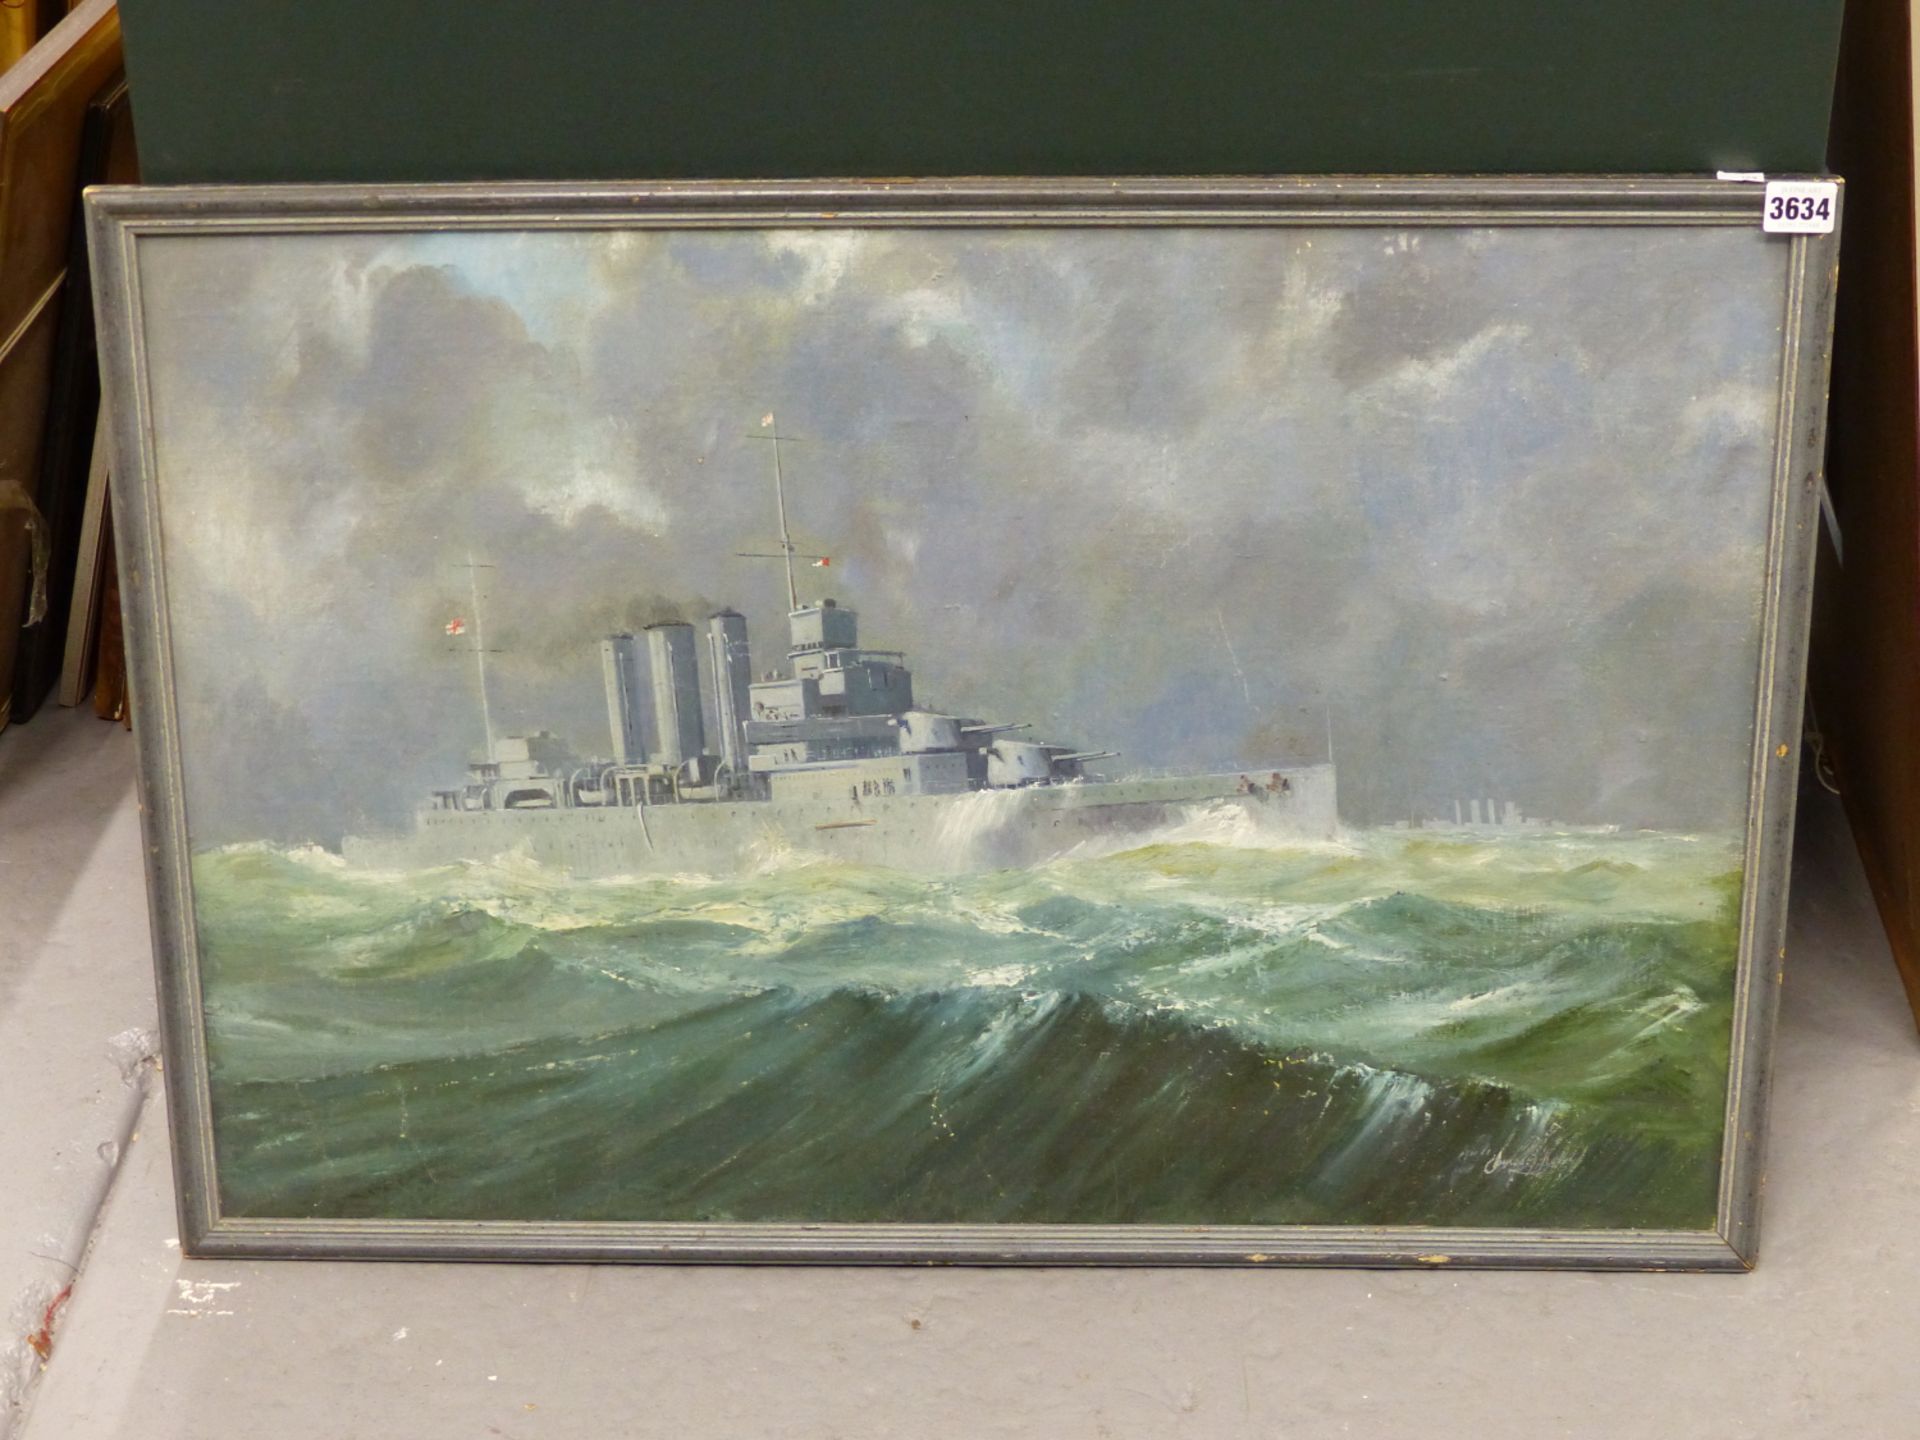 20TH CENTURY ENGLISH SCHOOL, STUDY OF A BRITISH OR AUSTRALIAN COUNTY CLASS NAVAL BATTLE CRUISER IN - Image 4 of 5